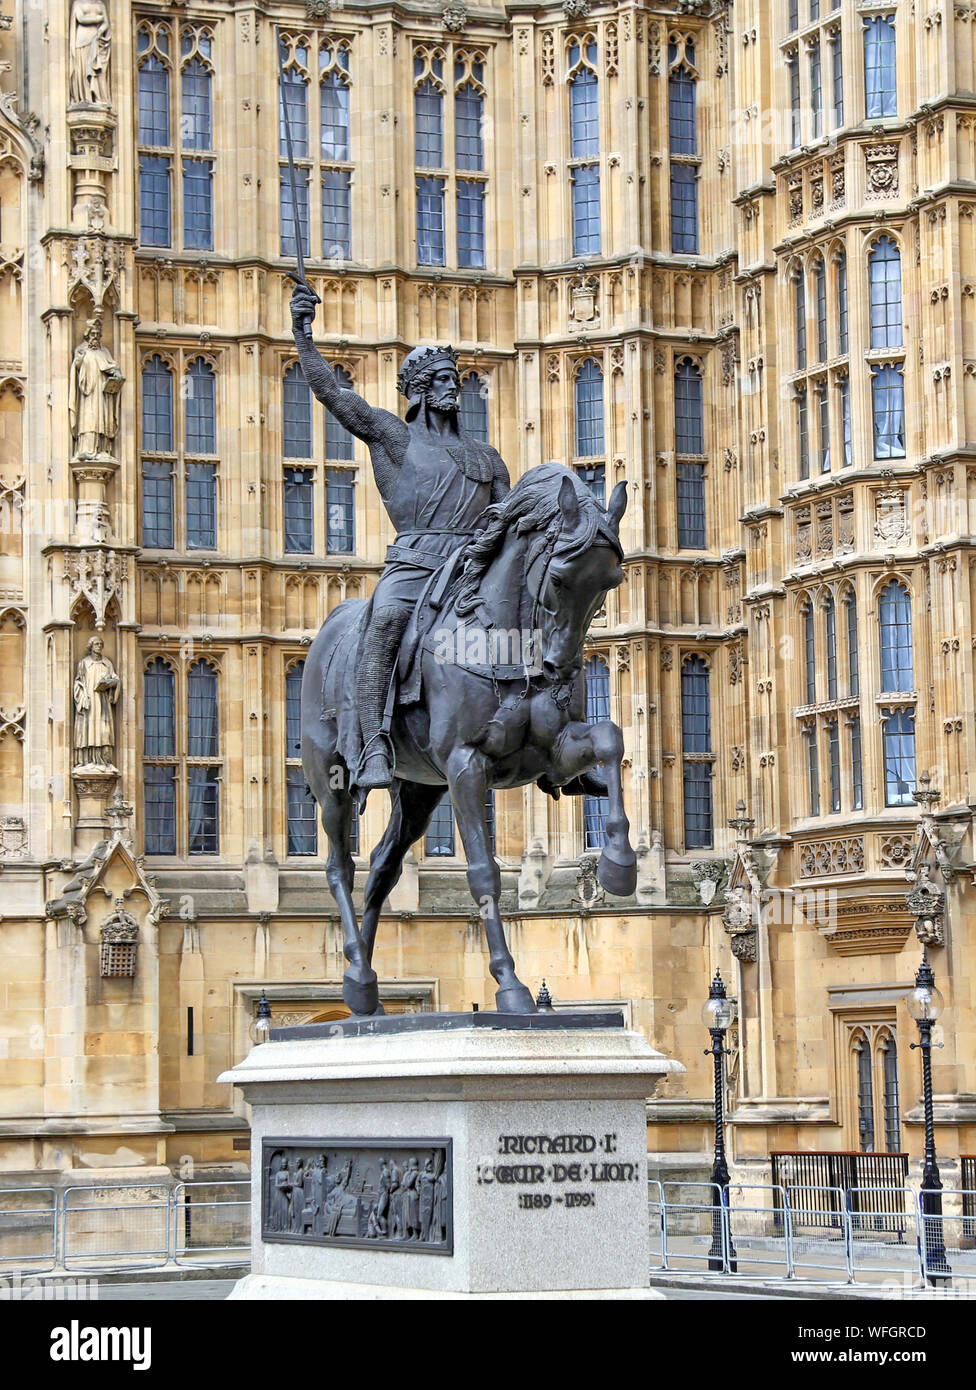 London, Great Britain -May 22, 2016: Richard the Lionheart statue outside the House of Lords, Westminster Palace, the Houses of Parliament, the Parlia Stock Photo